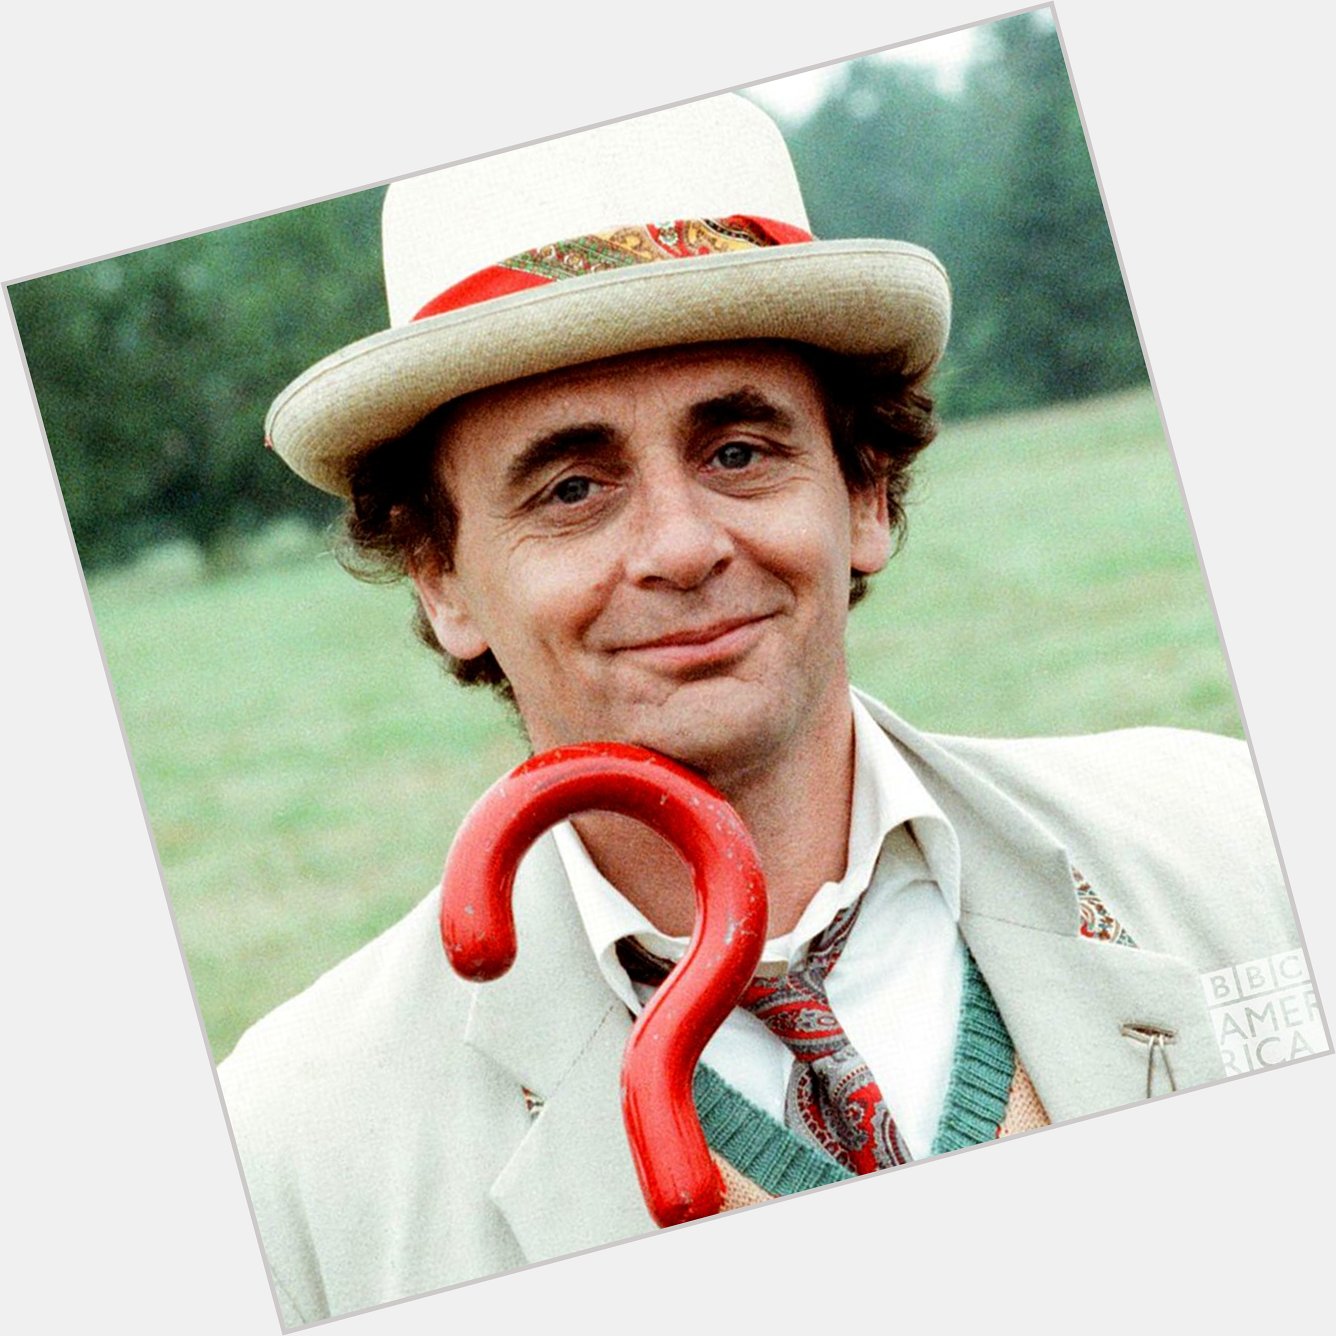  A very happy birthday to the Seventh Doctor, Sylvester McCoy. 